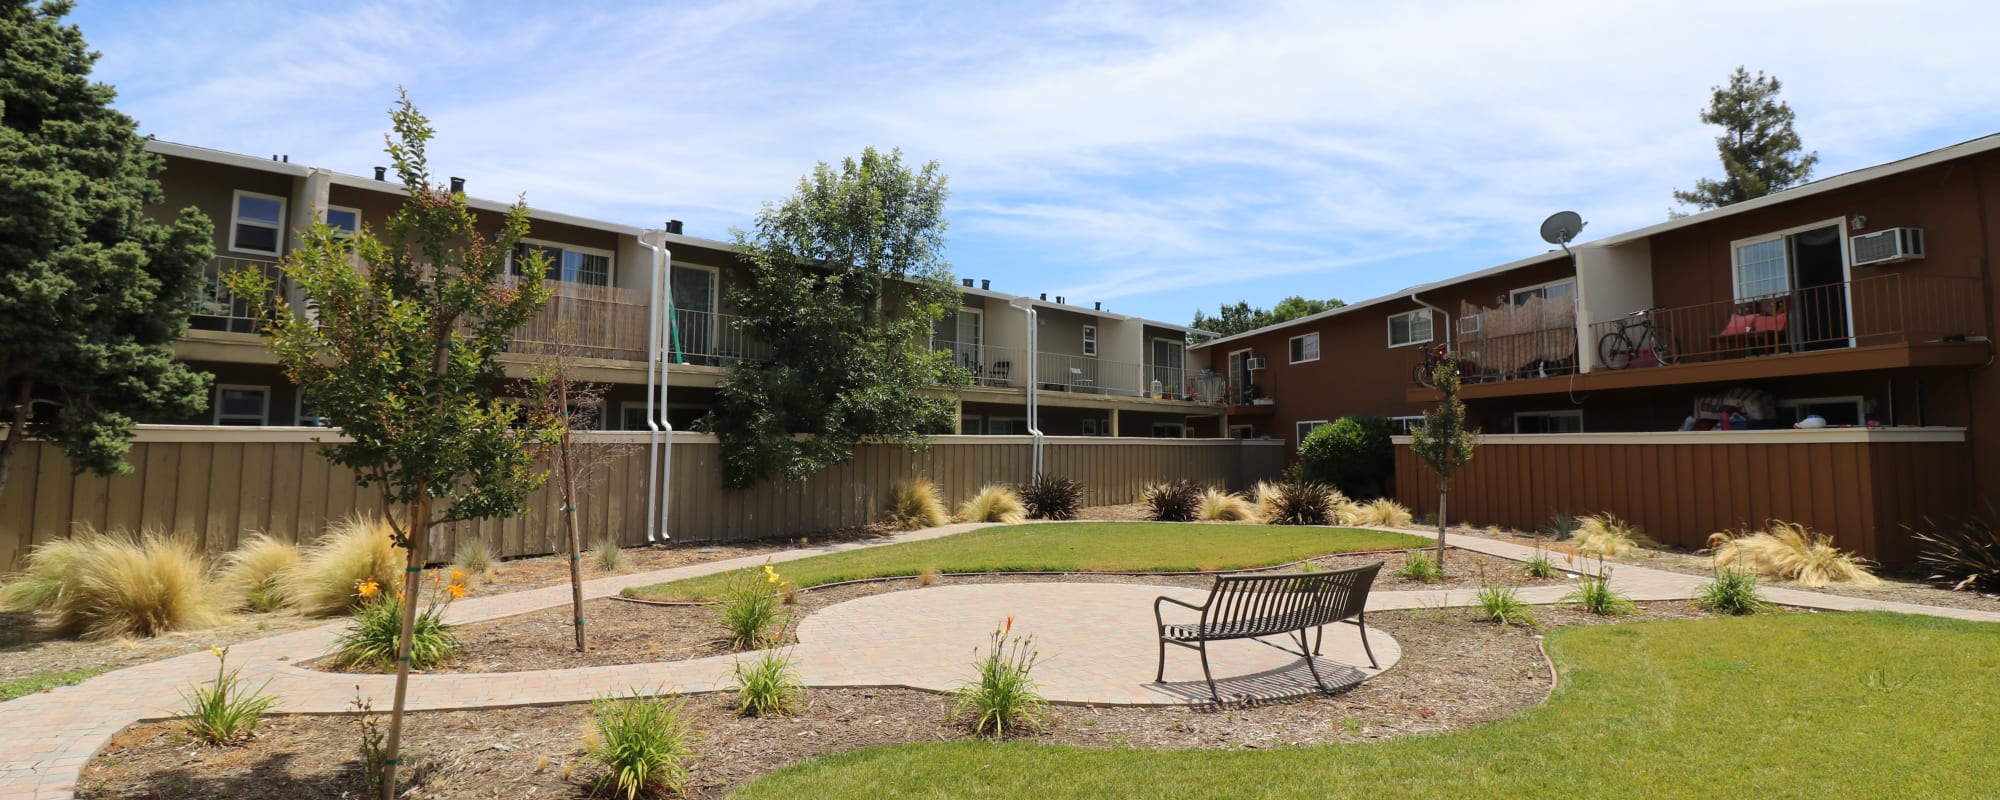 Photo Gallery | Mountain View Apartments in Concord, California